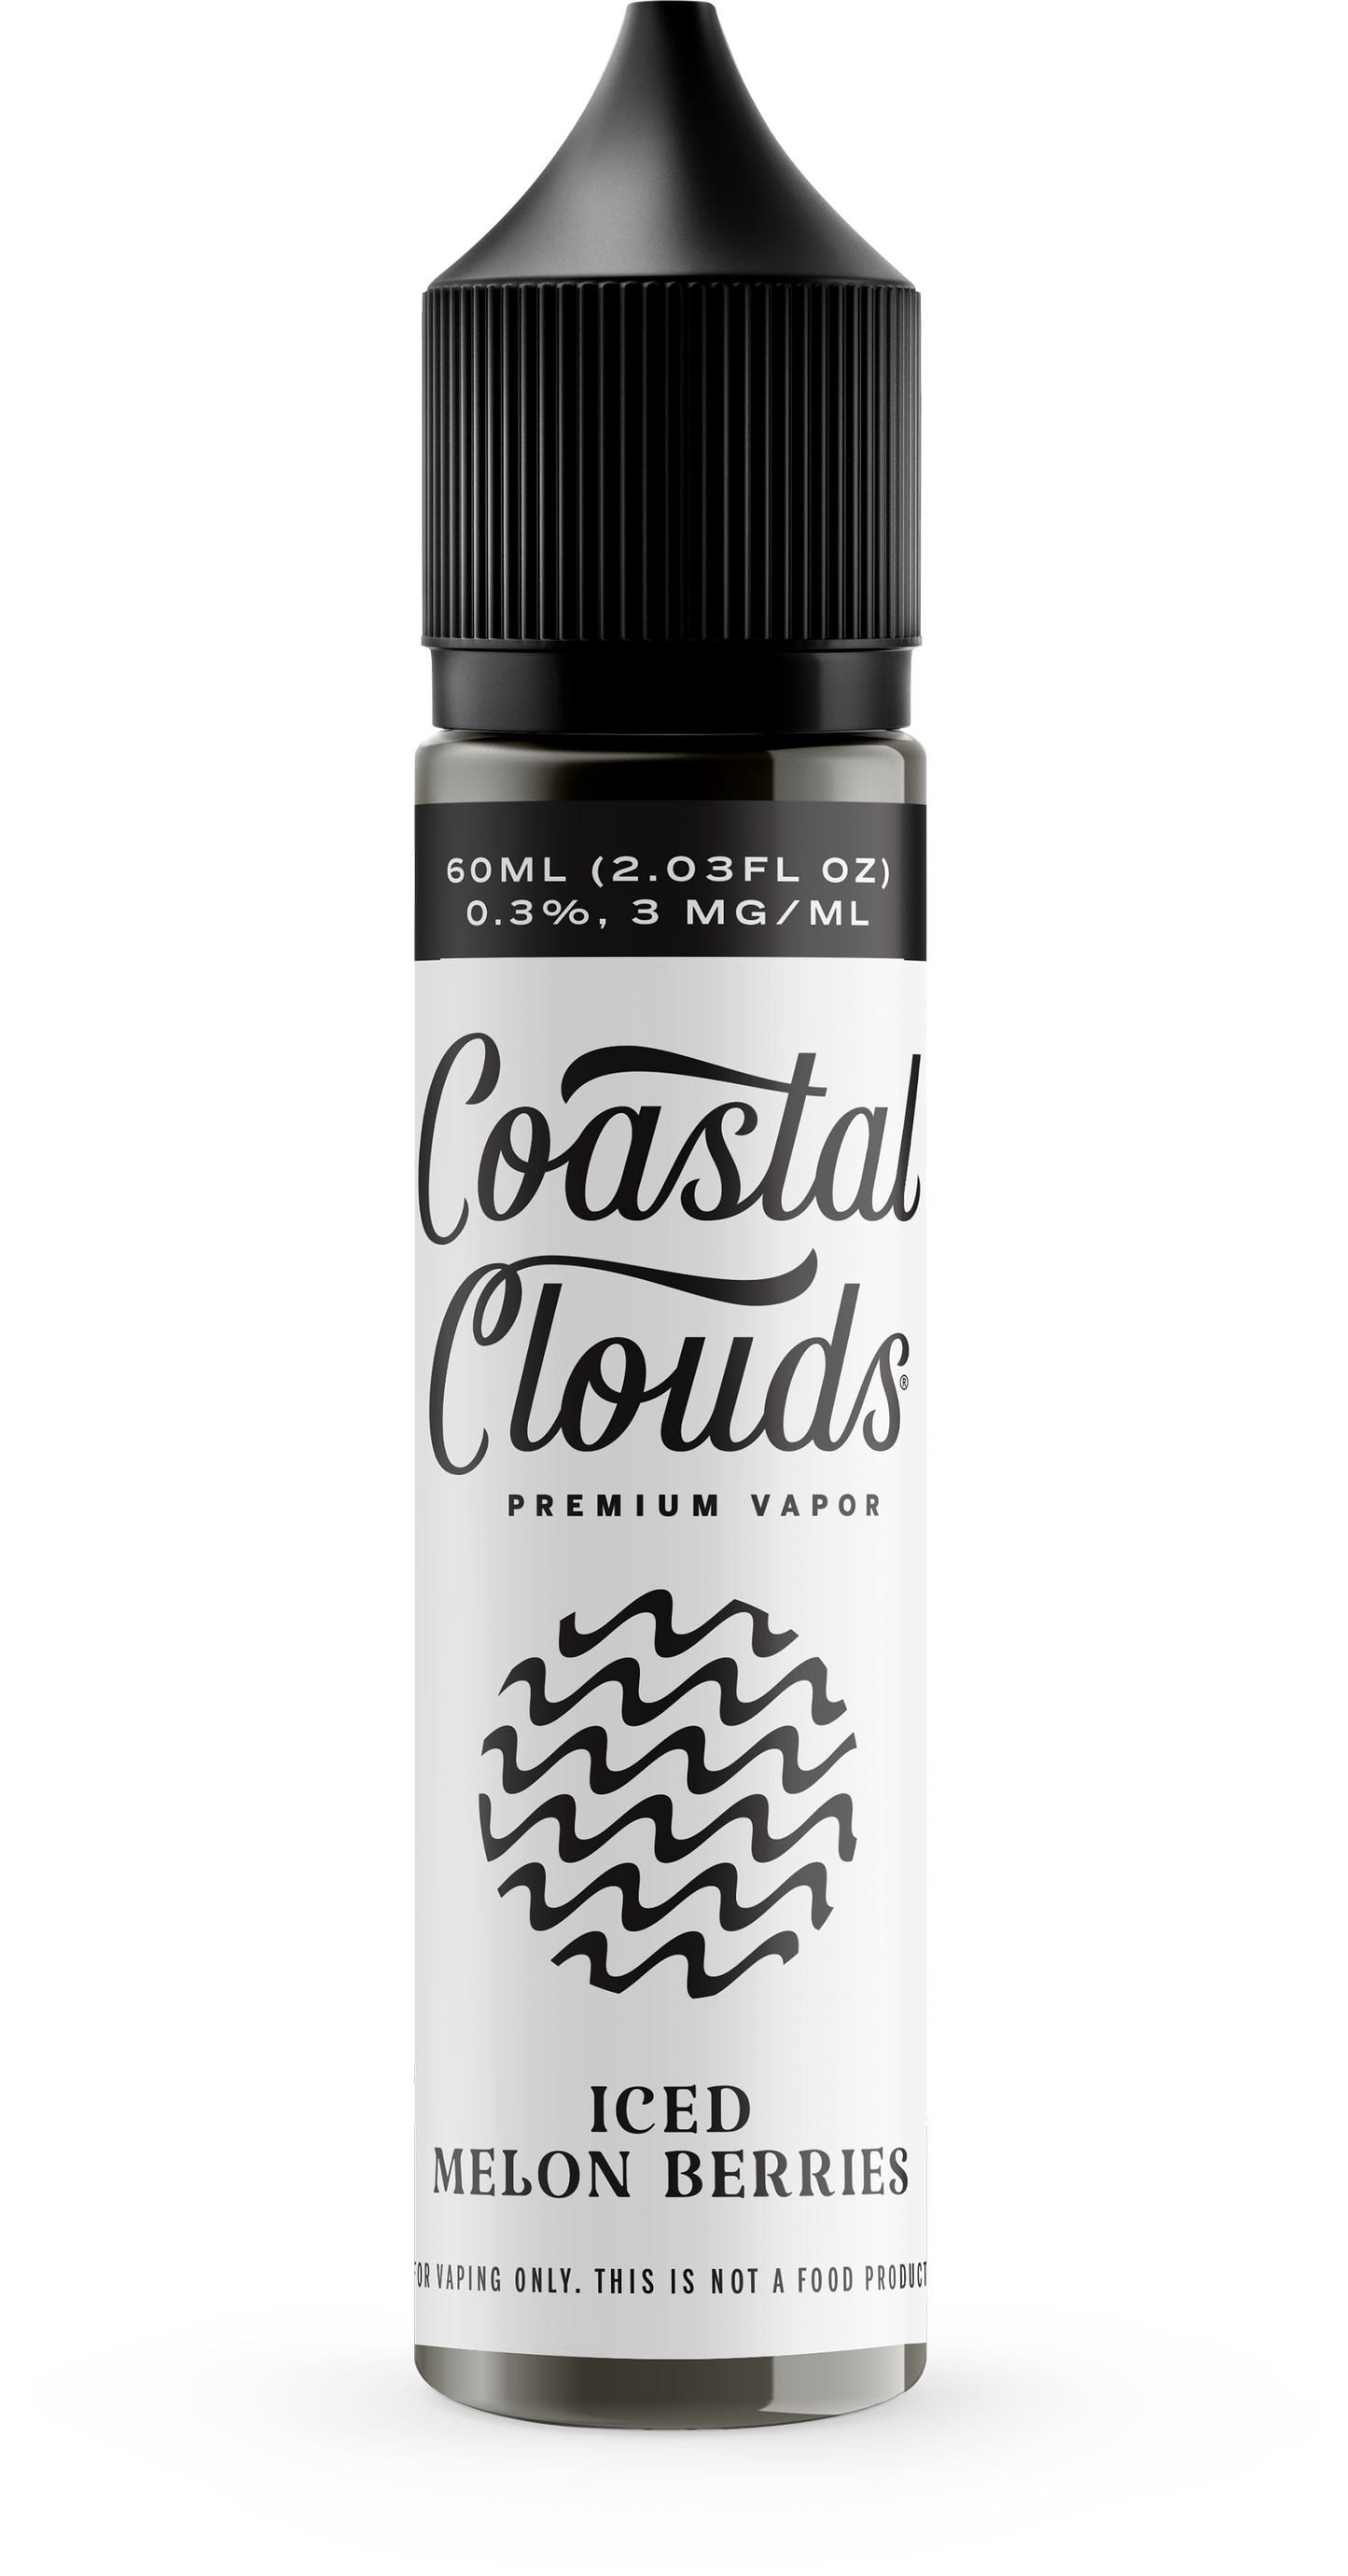 Iced Melon Berries by Coastal Clouds 60ml Bottle